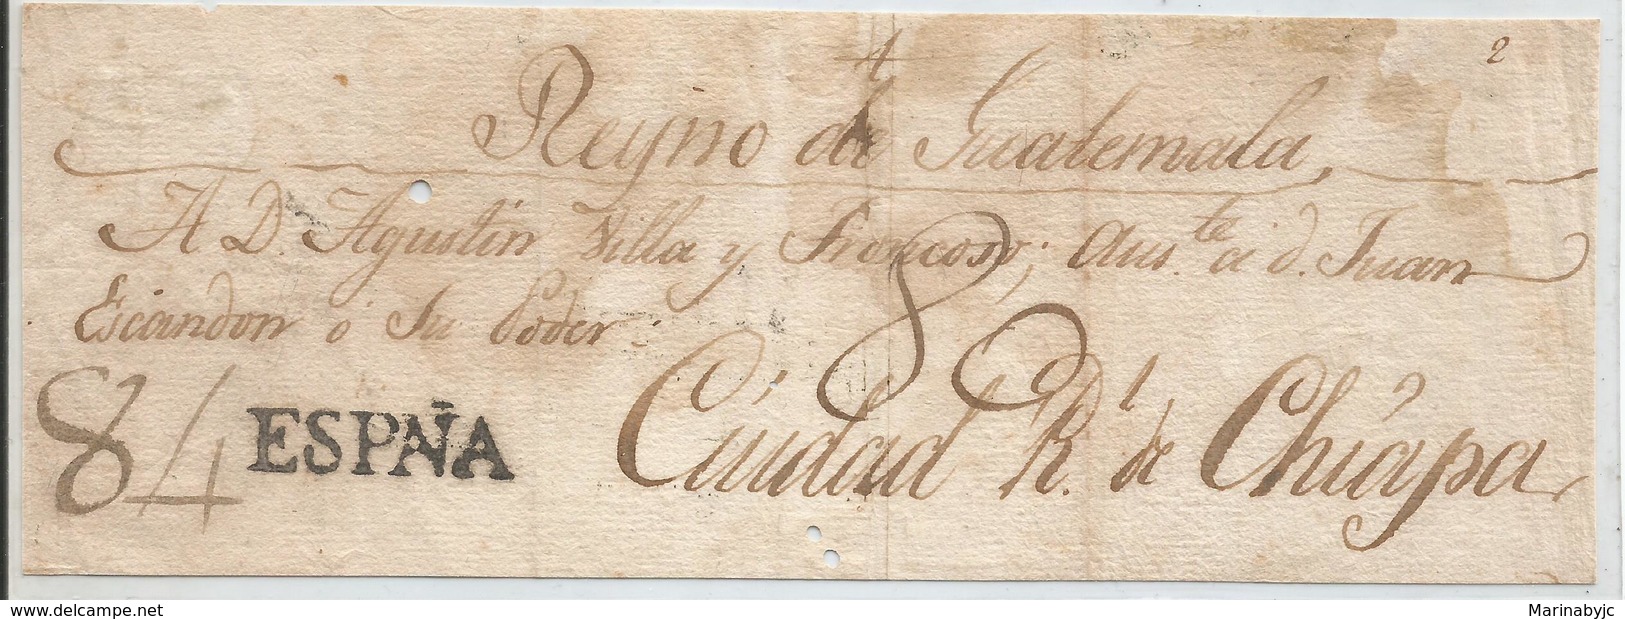 Vtaed.J) 1805 MEXICO, FRONT OF LETTER, FROM SPAIN TO CIUDAD REAL DE CHIAPAS (KINGDOM OF GUATEMALA) BRAND SPAIN IN NEFR - Mexico